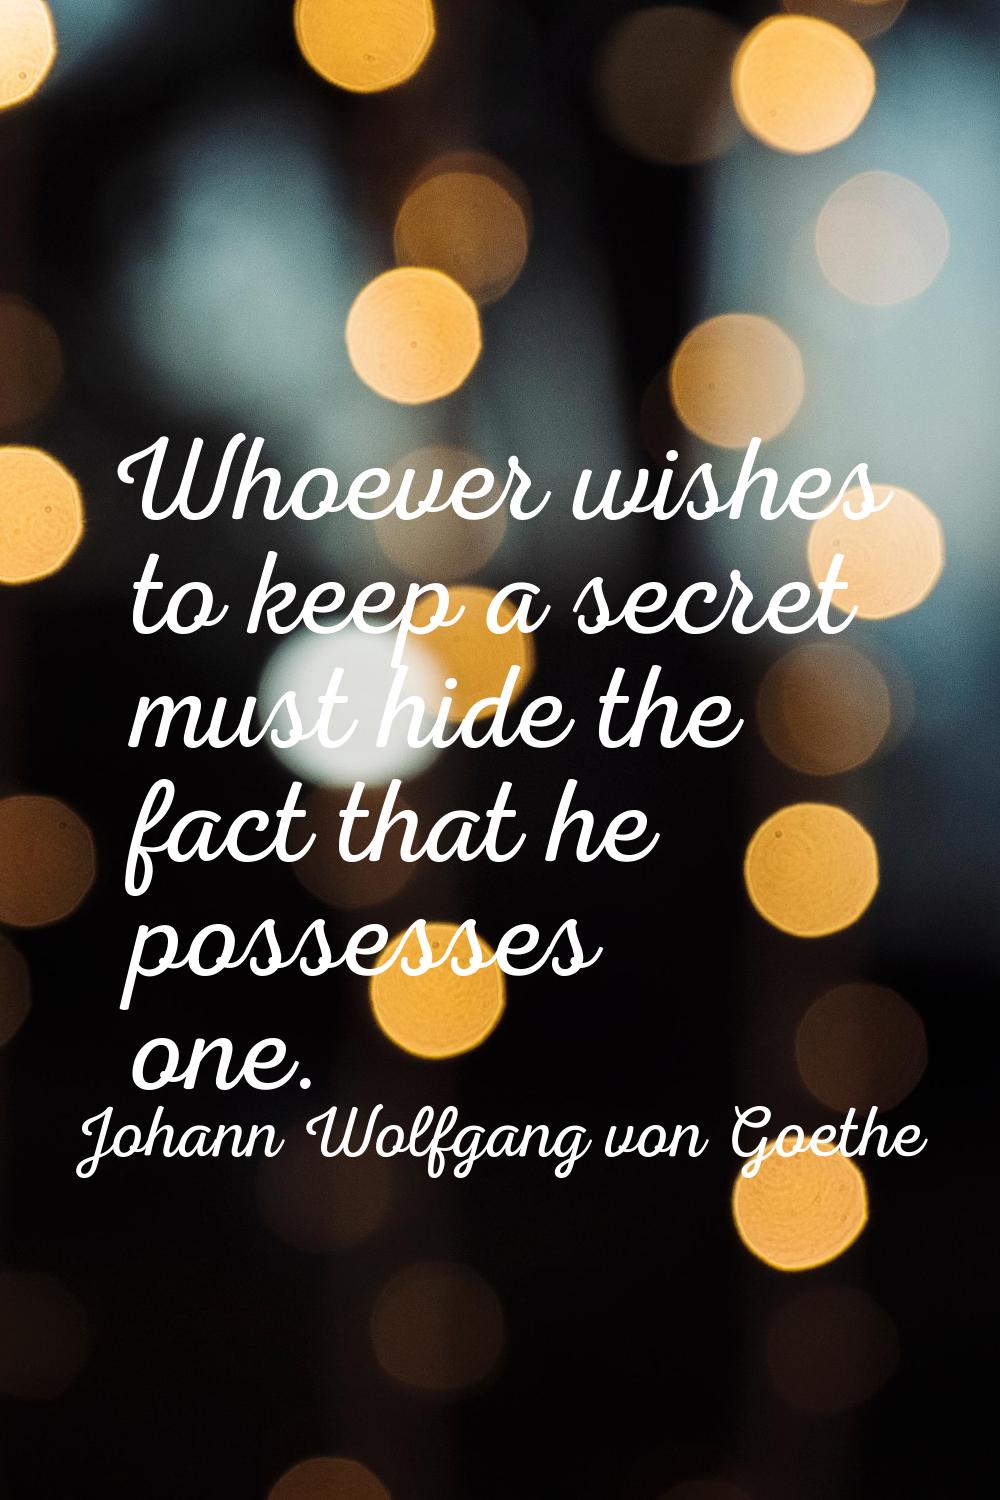 Whoever wishes to keep a secret must hide the fact that he possesses one.